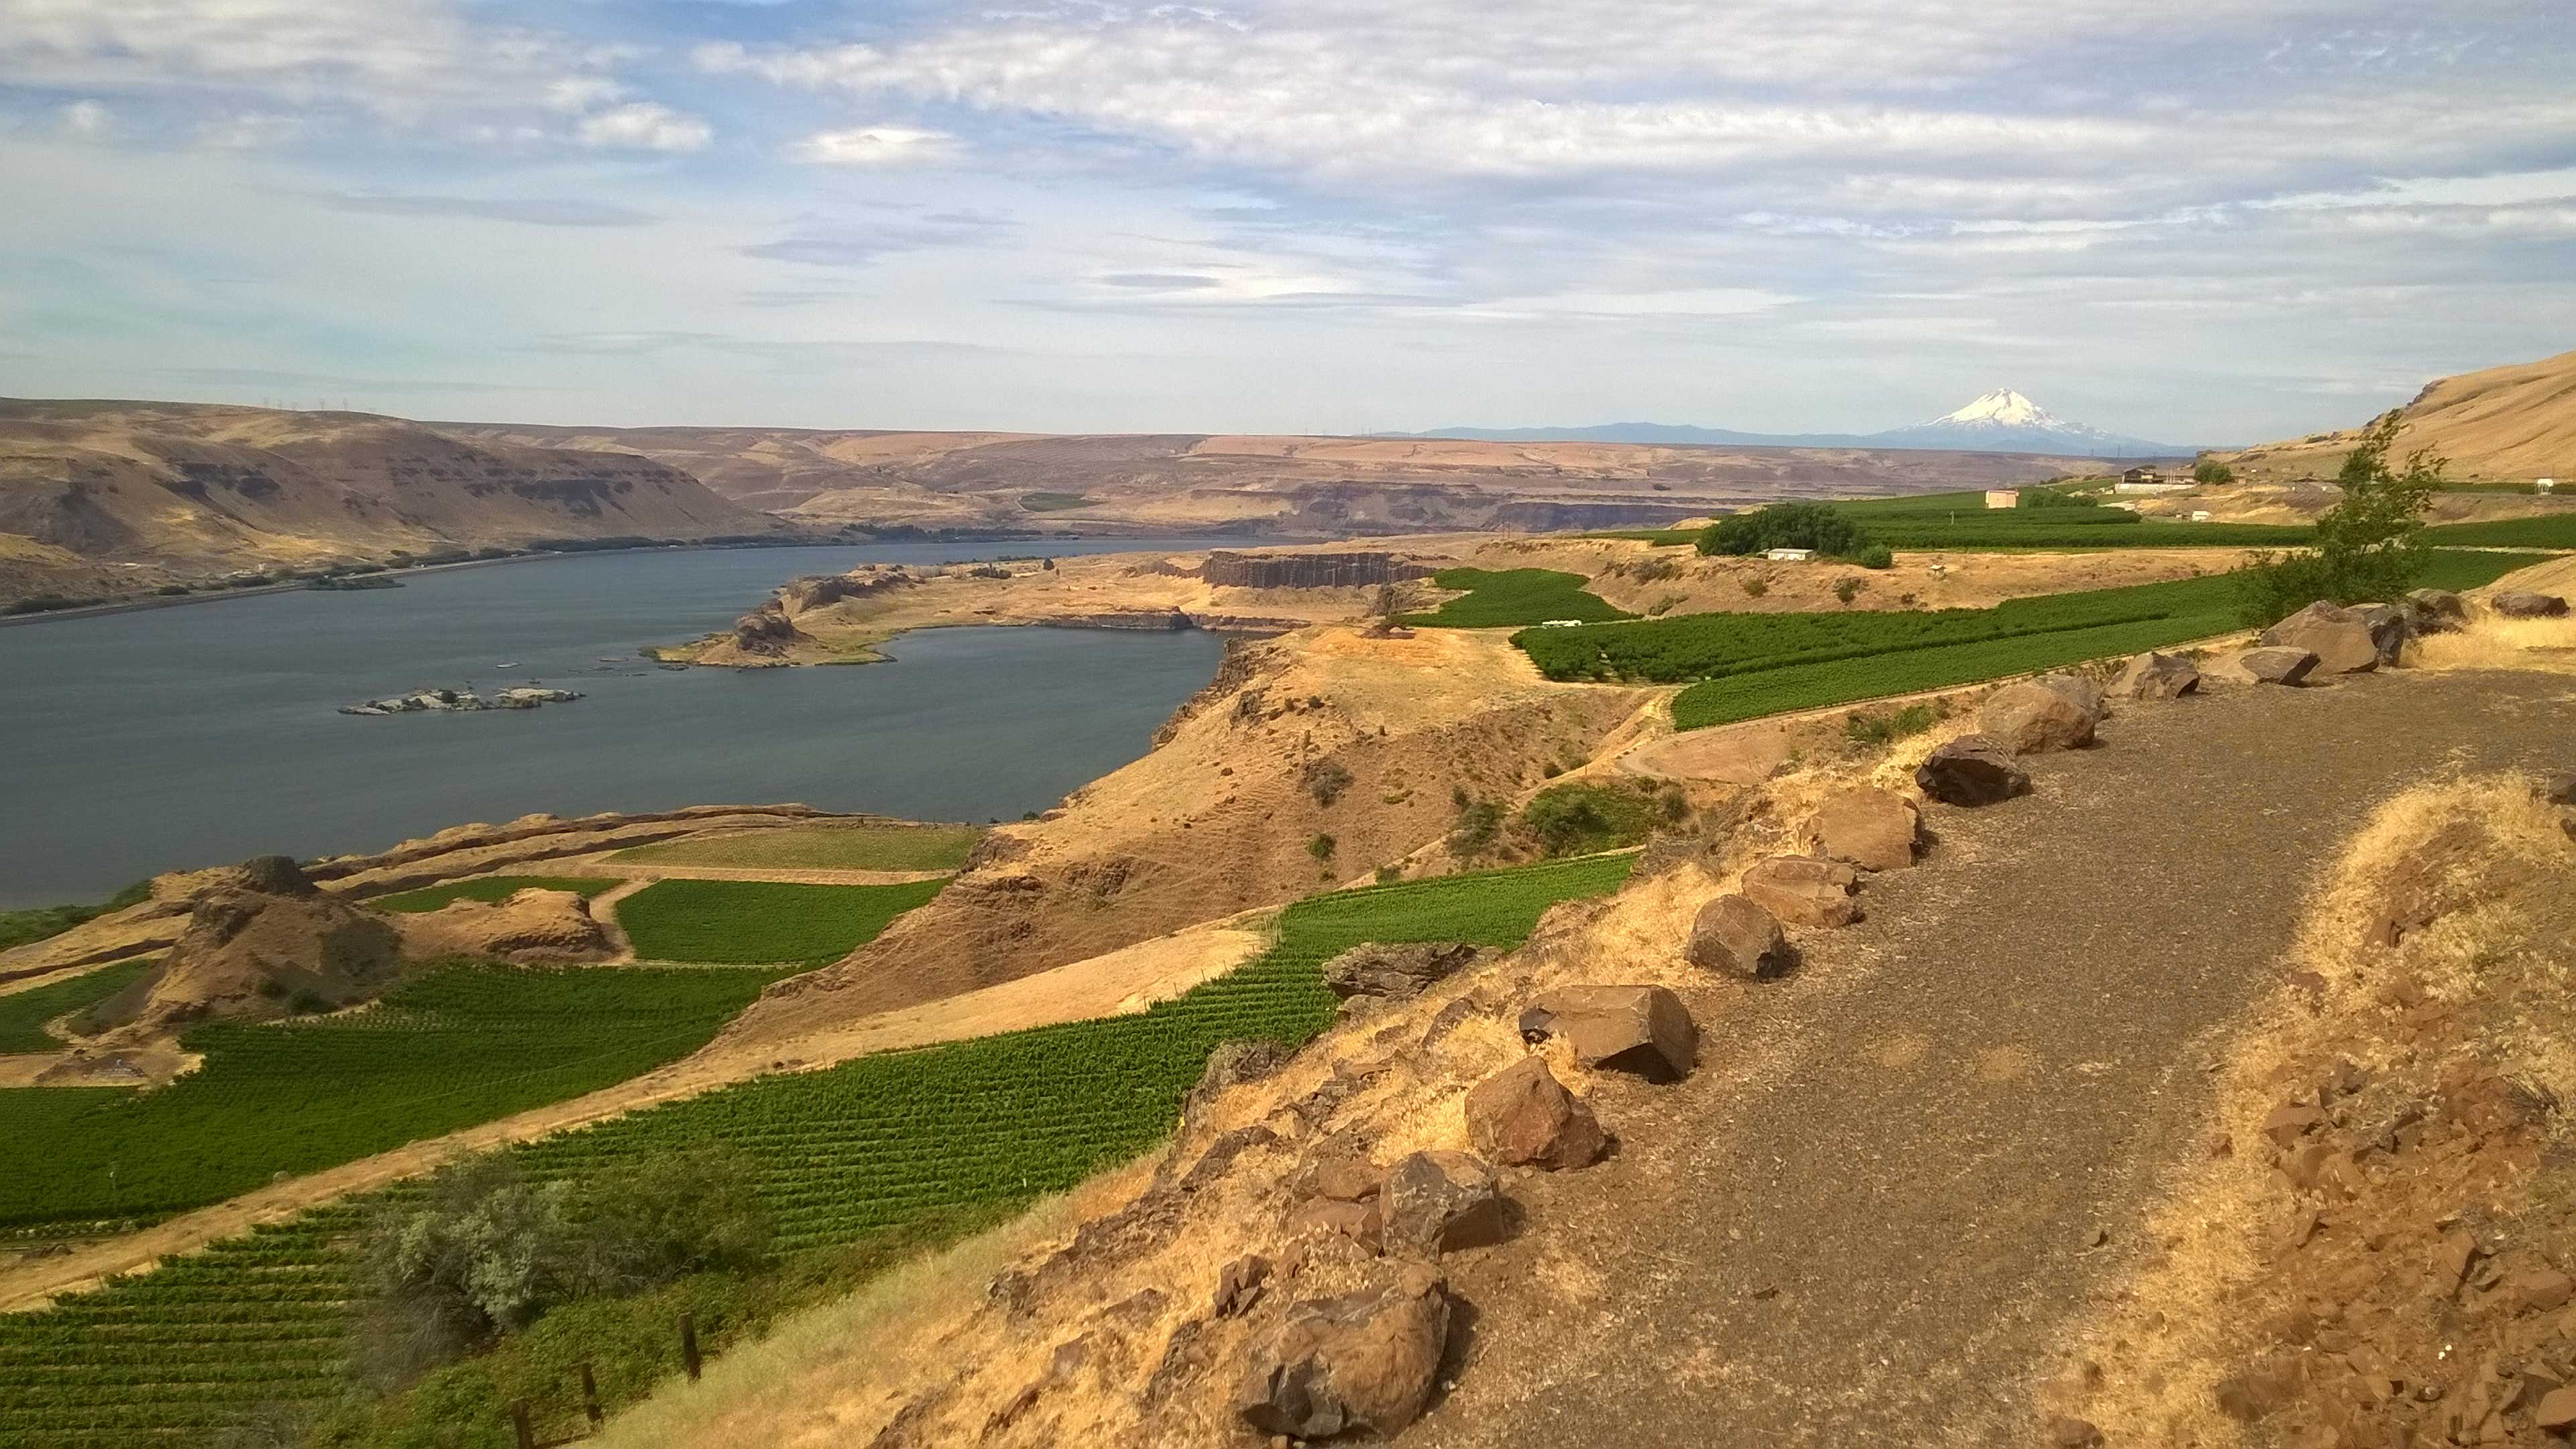 The Columbia Gorge has a north side, too